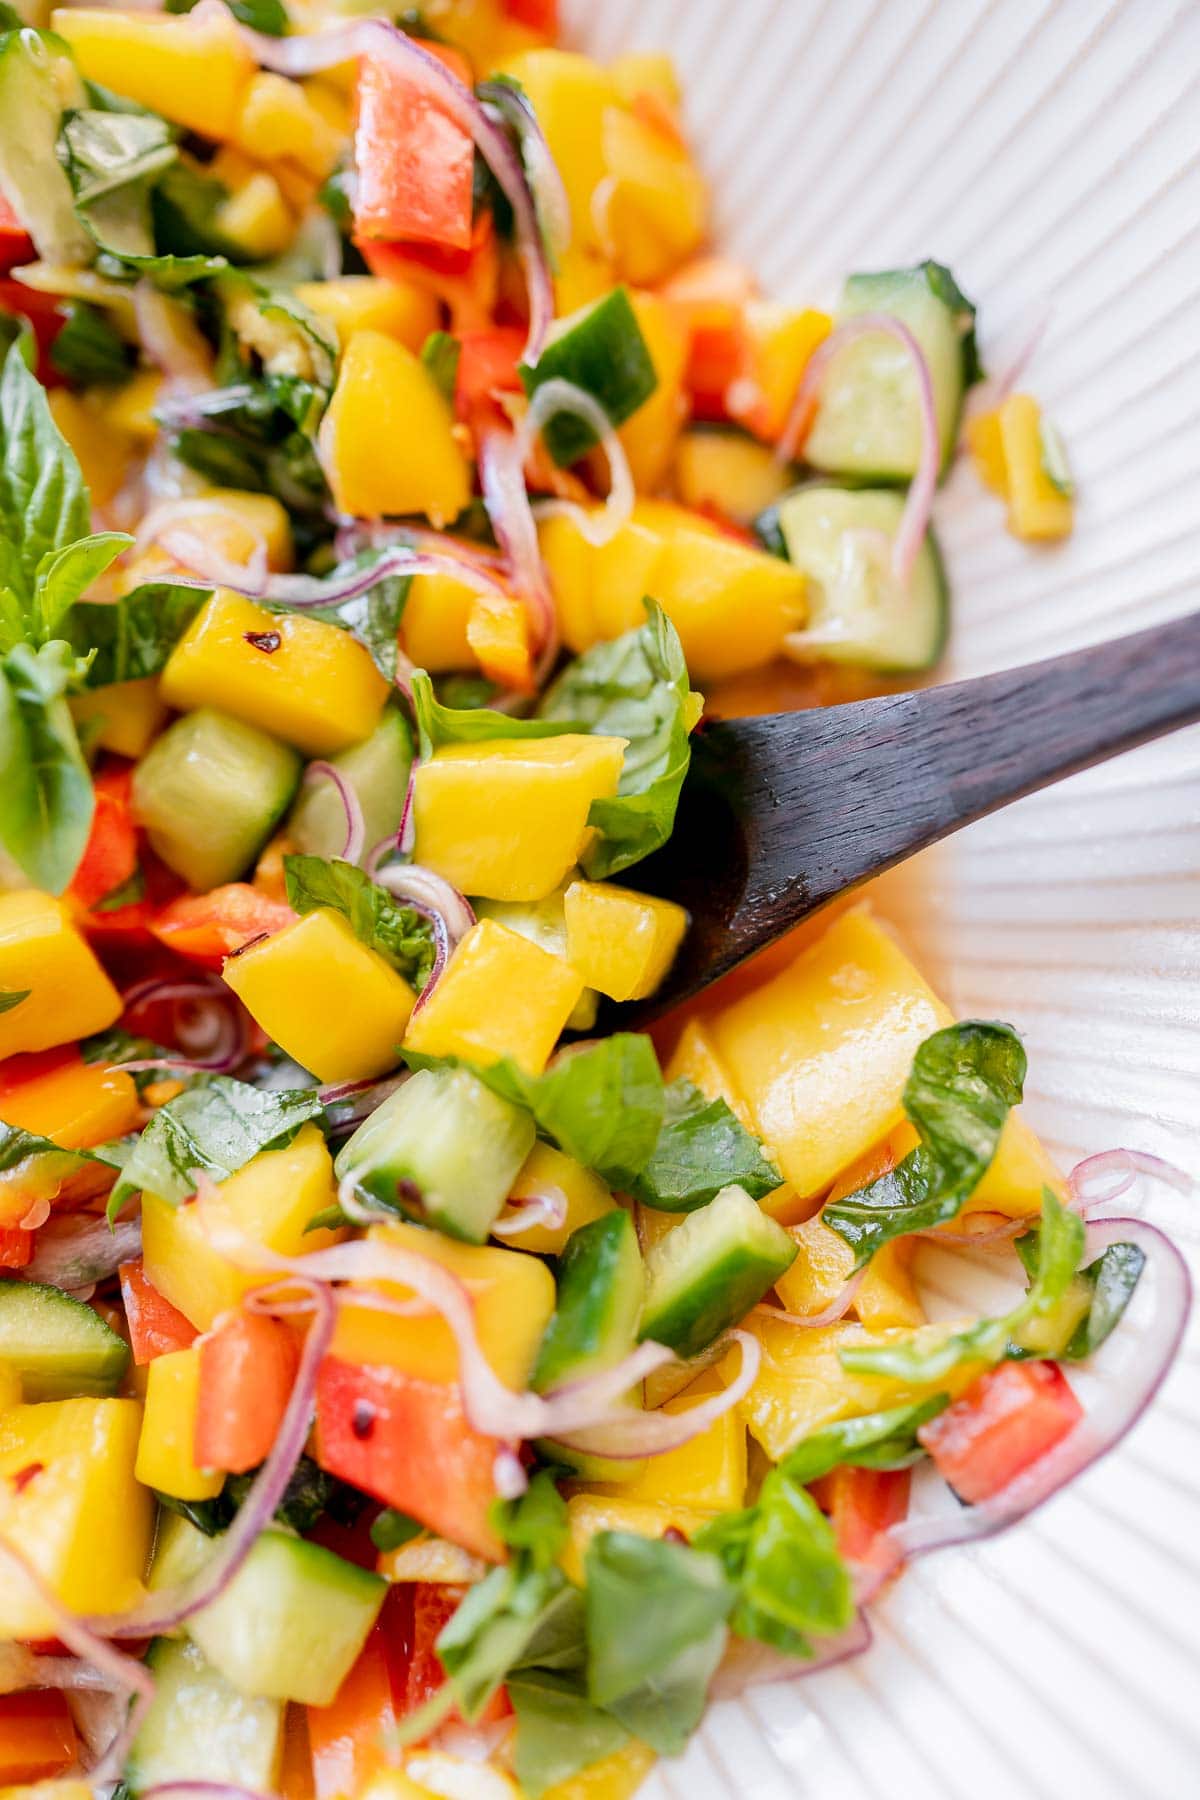 A wooden spoon scoops mango salad out of a large white bowl.